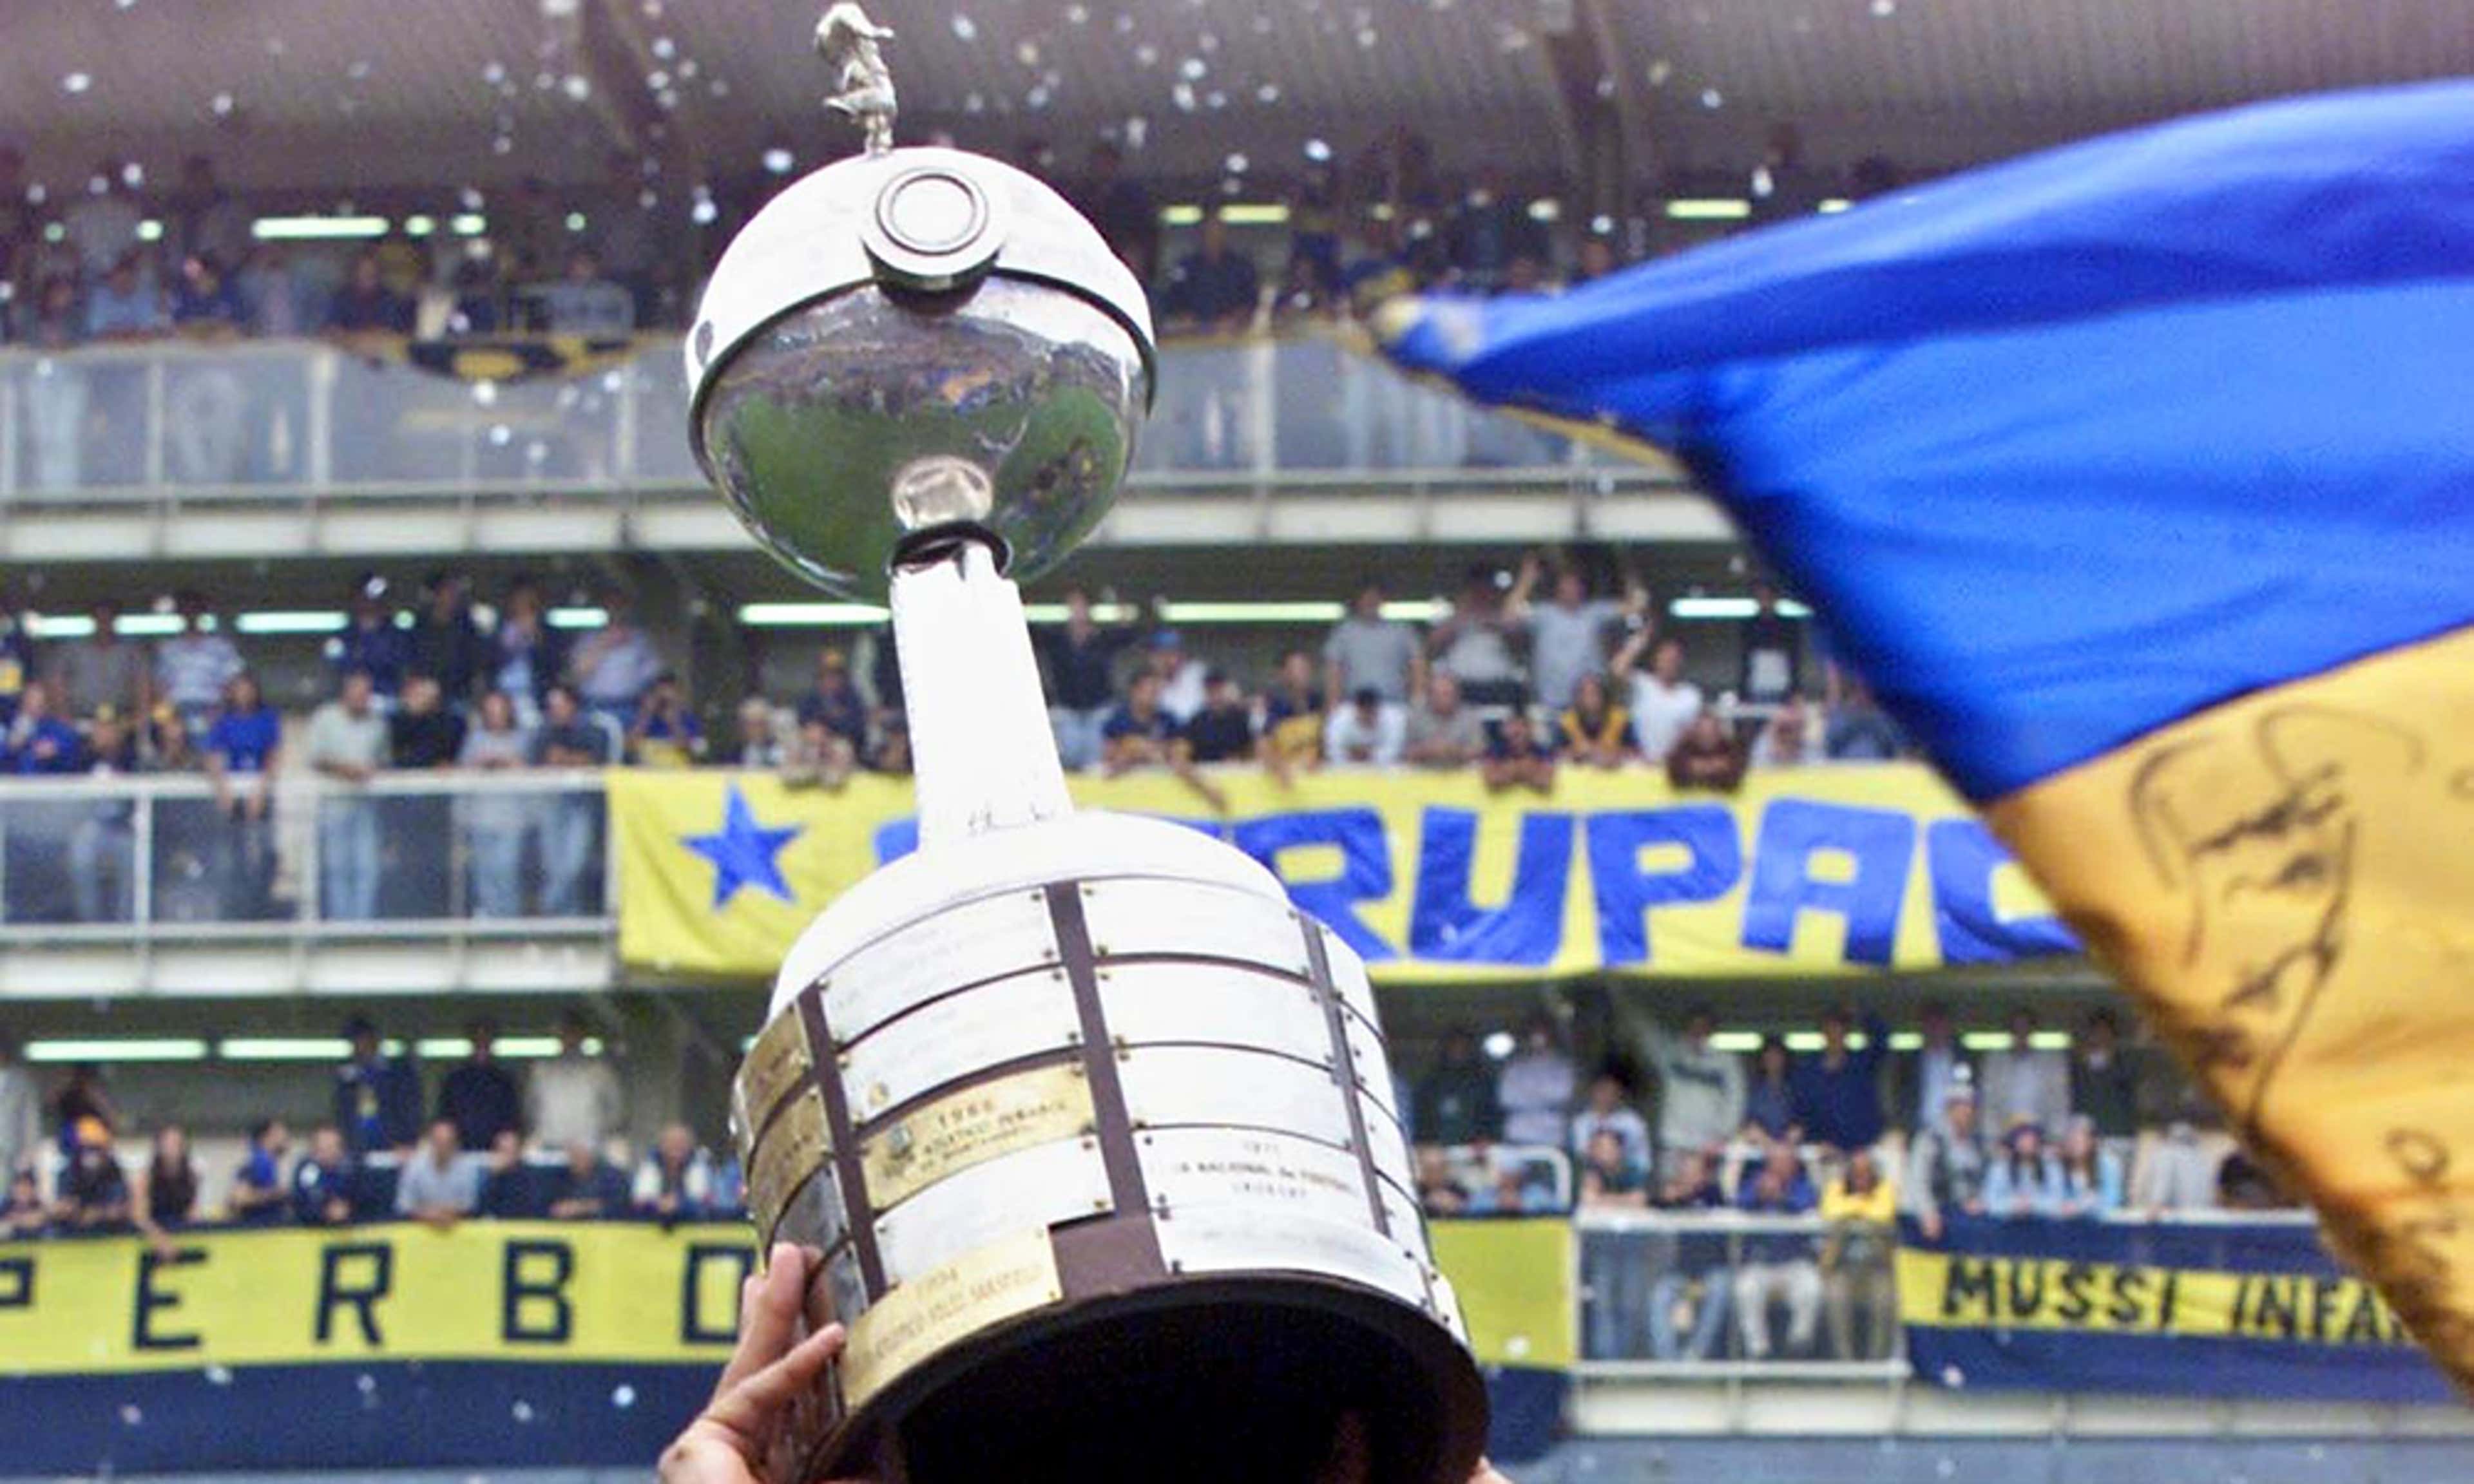 Intercontinental Cup Trophy